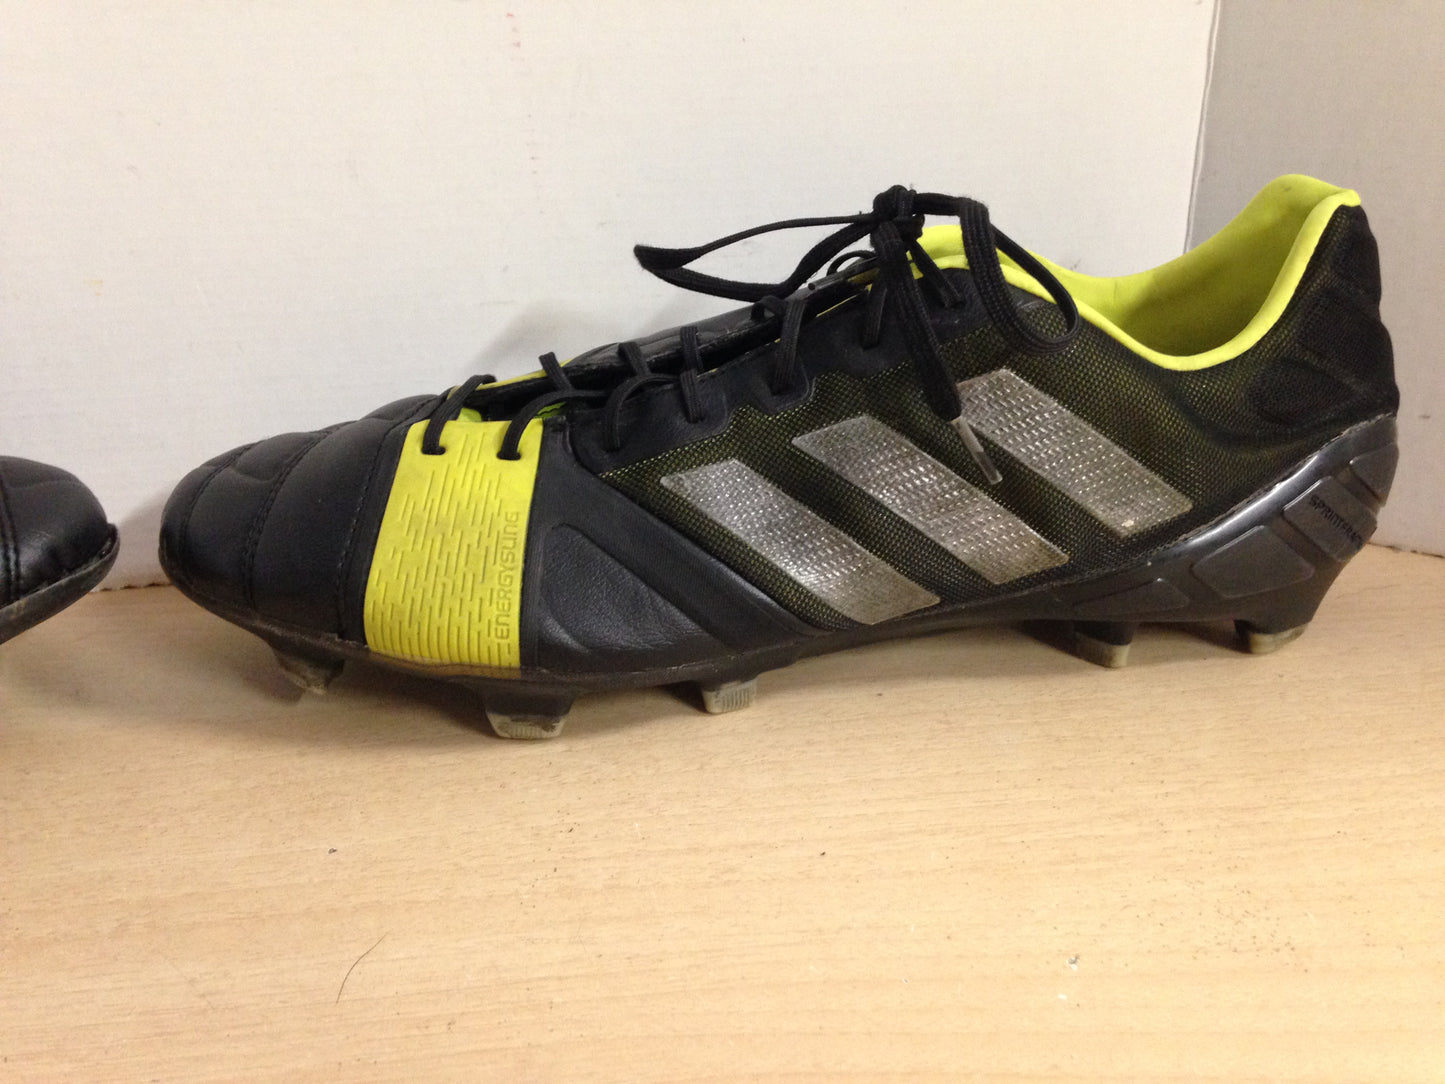 Soccer Shoes Cleats Men's Size 11.5 Adidas Nitrocharge Black and Lime